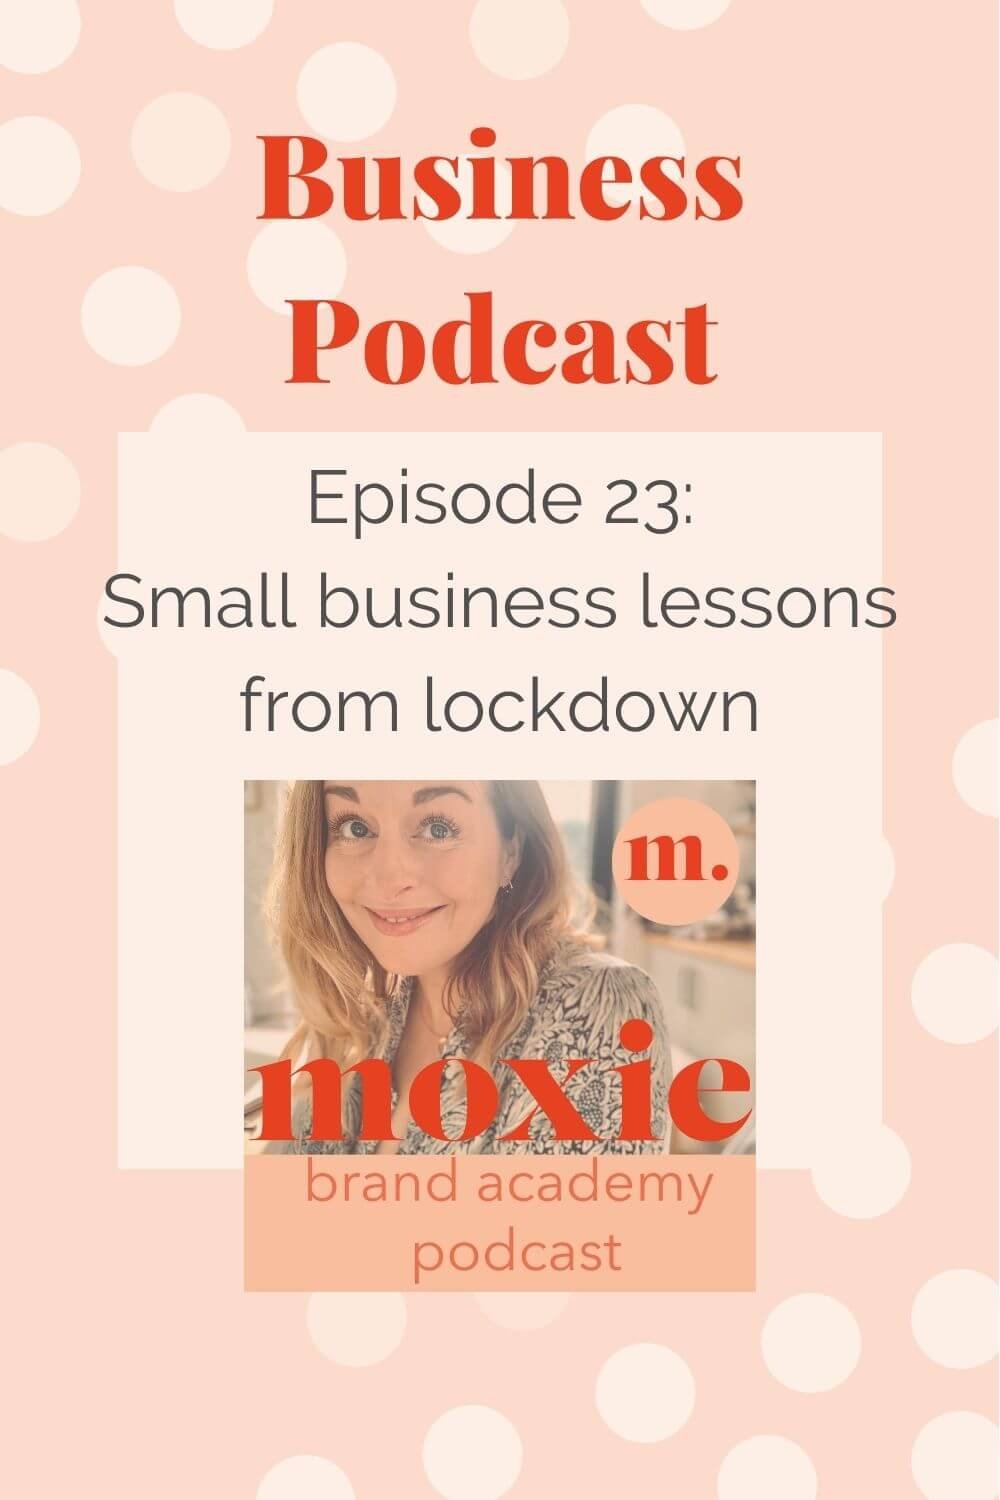 Small business lessons from lockdown